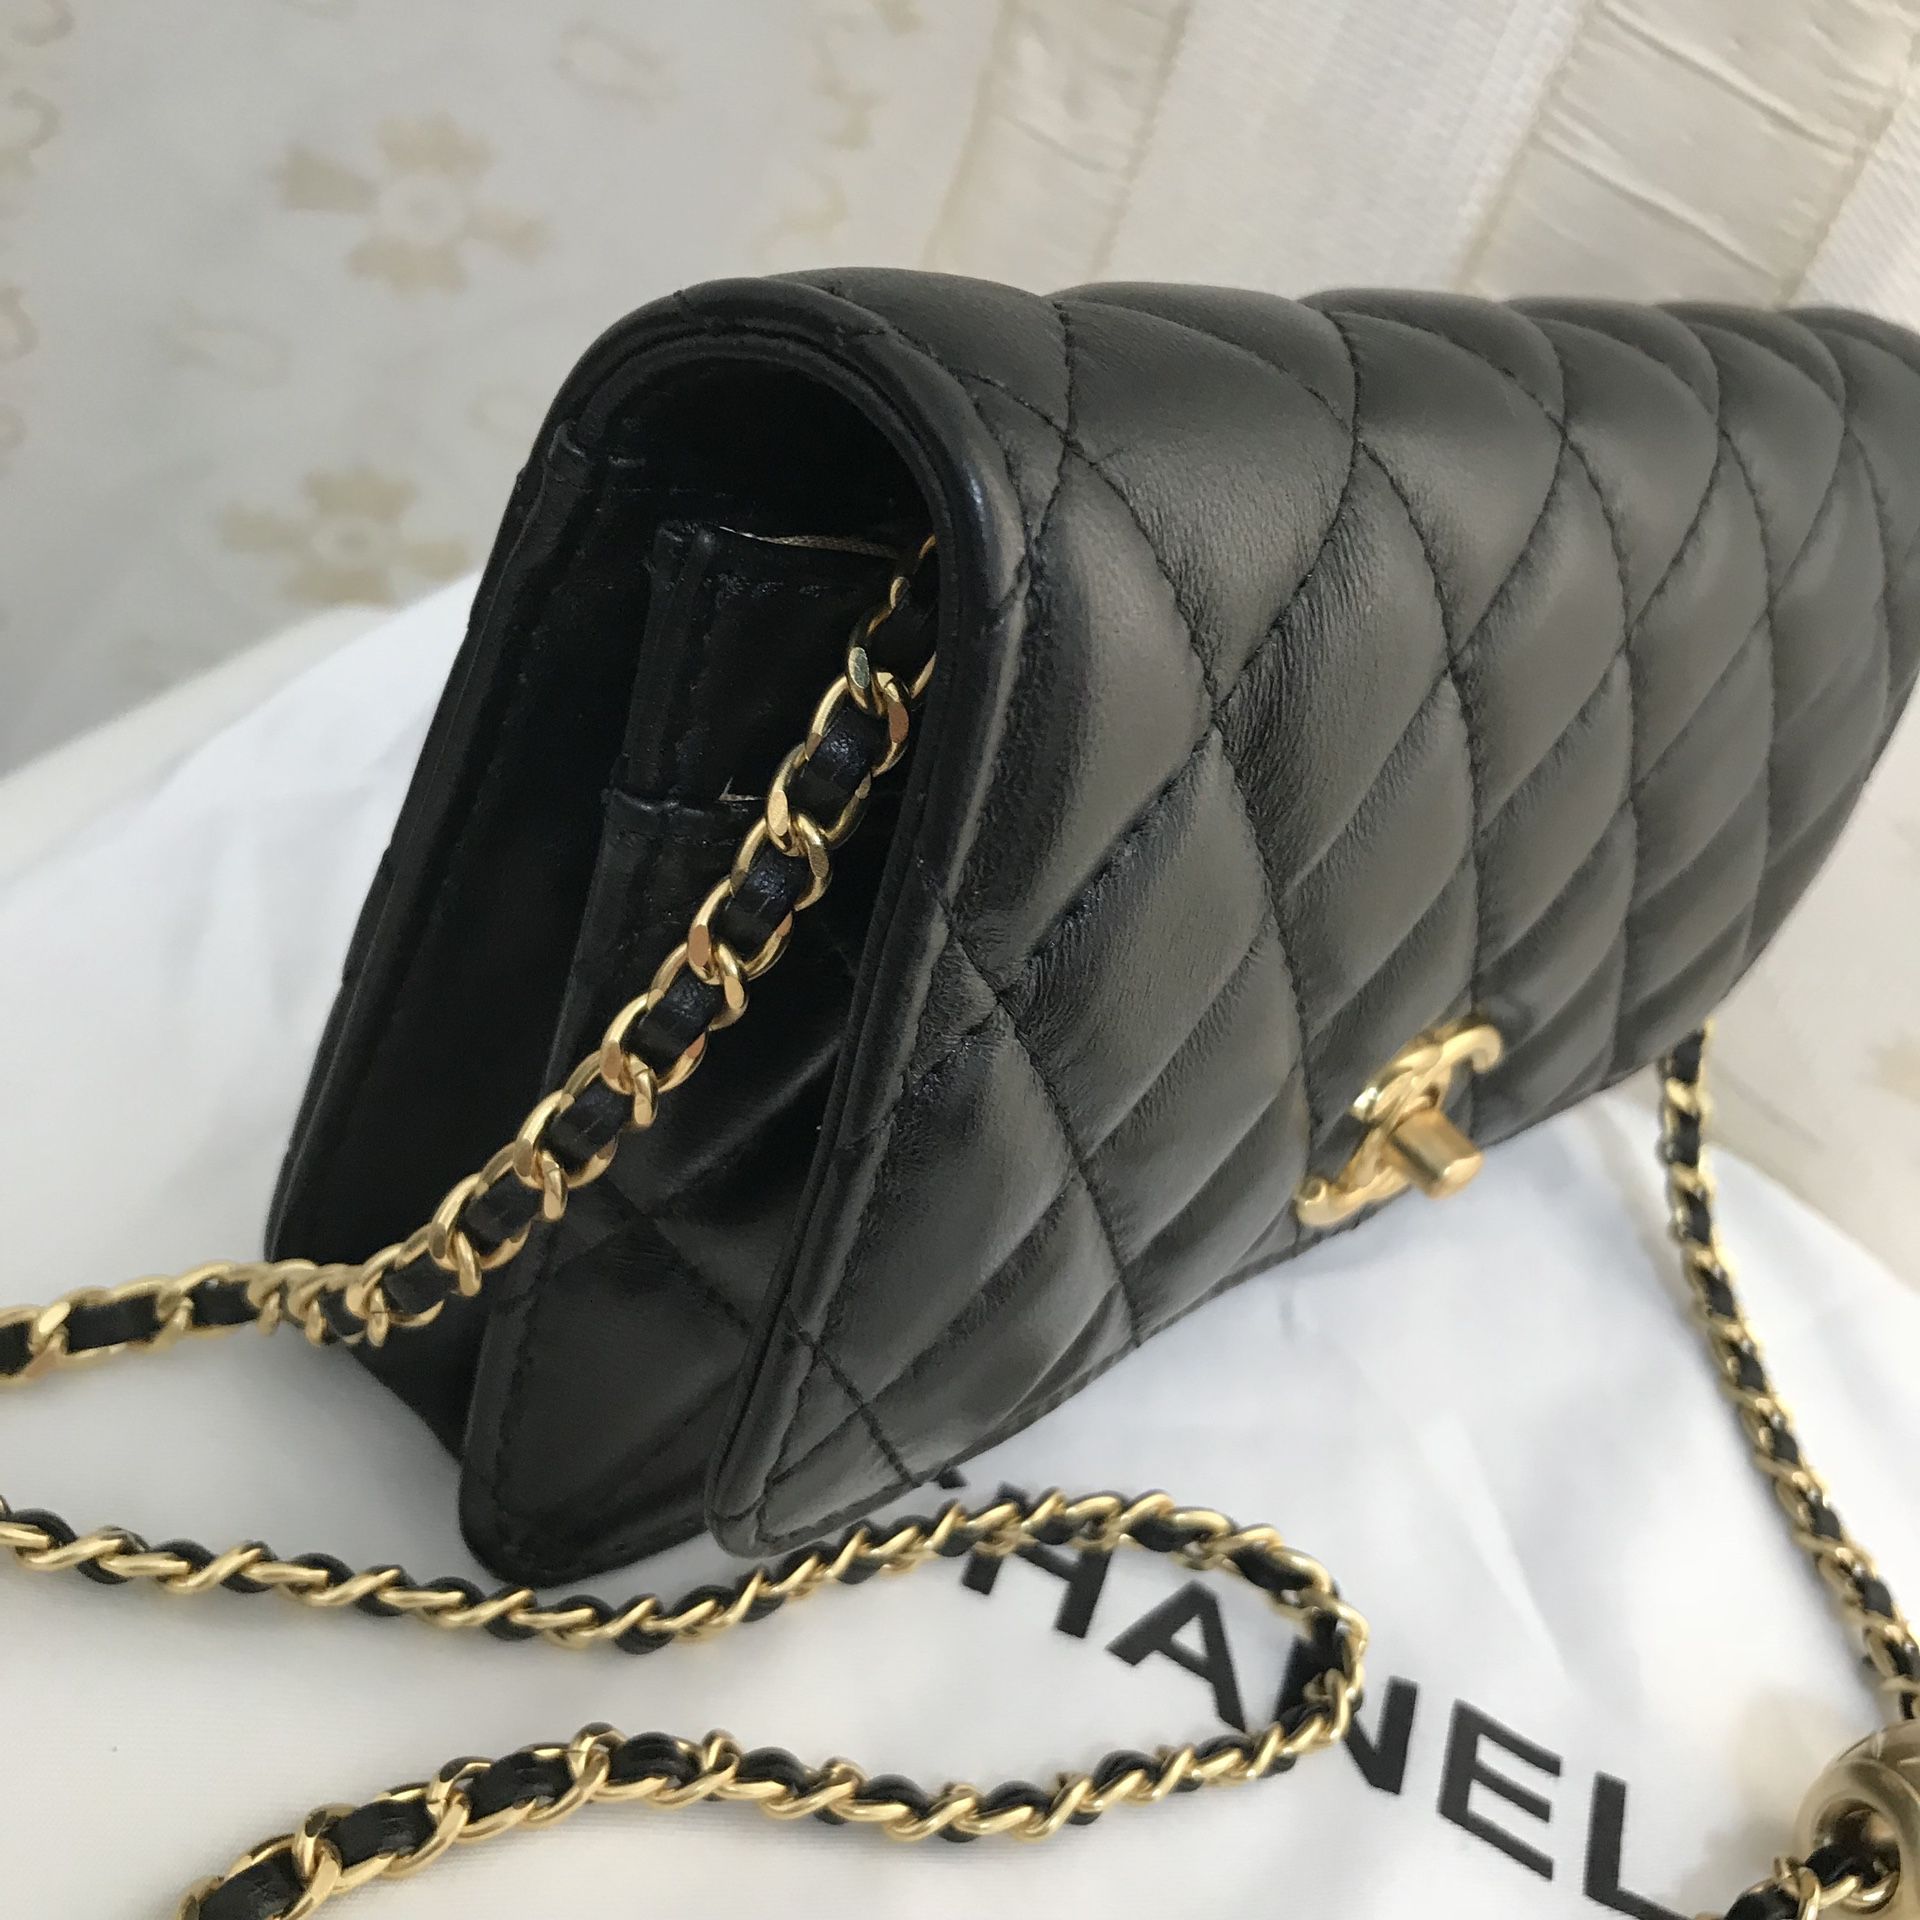 Chanel bag classic paragraph small gold ball chain bag shoulder